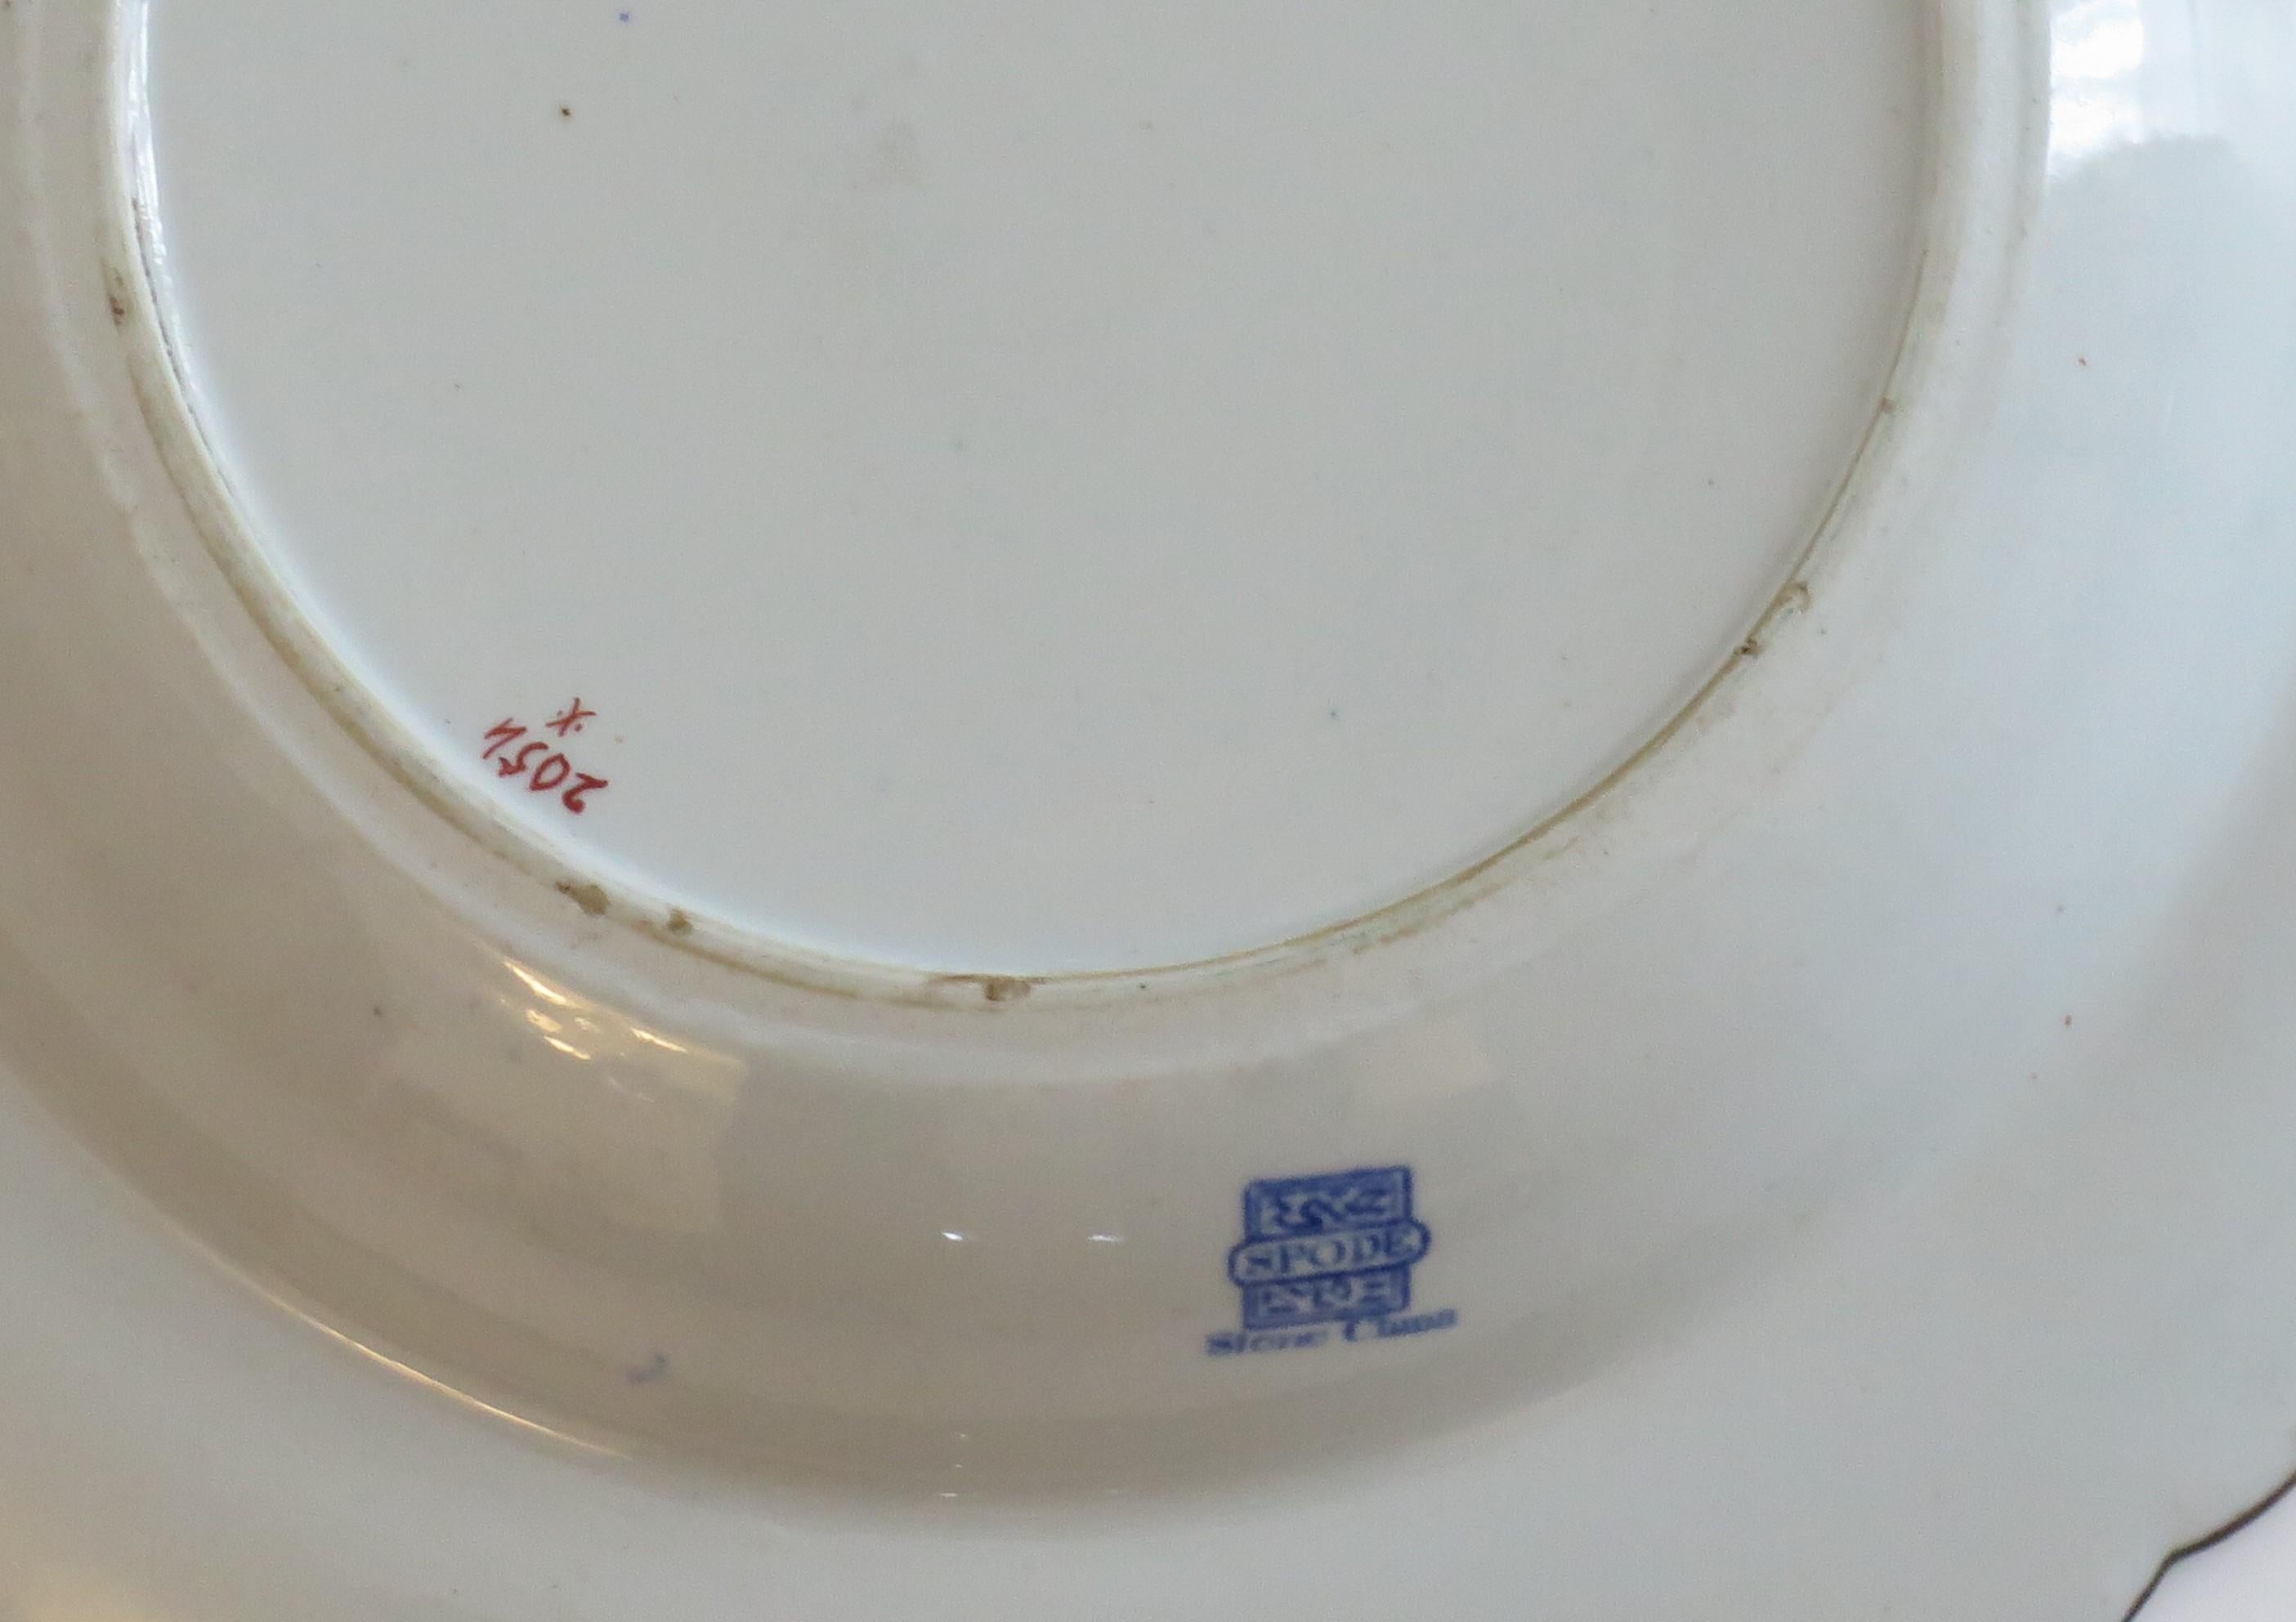 19th Century Georgian Spode Soup Bowl or Plate in Japan Floral Pattern No. 2054, circa 1820 For Sale